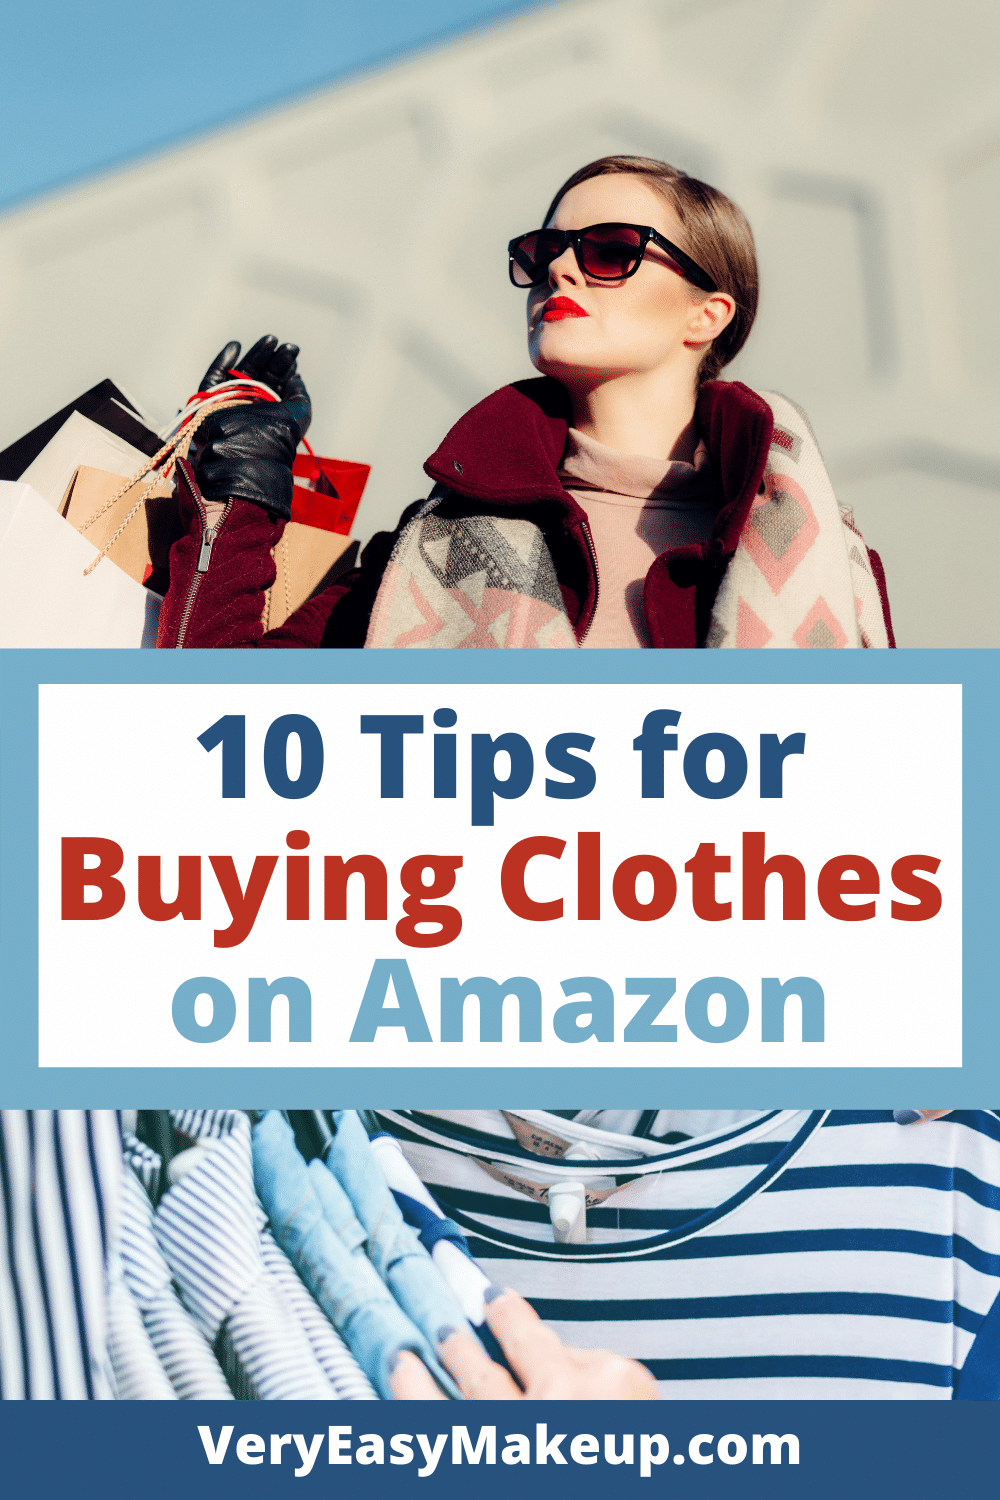 10 tips for buying clothes on Amazon by Very Easy Makeup